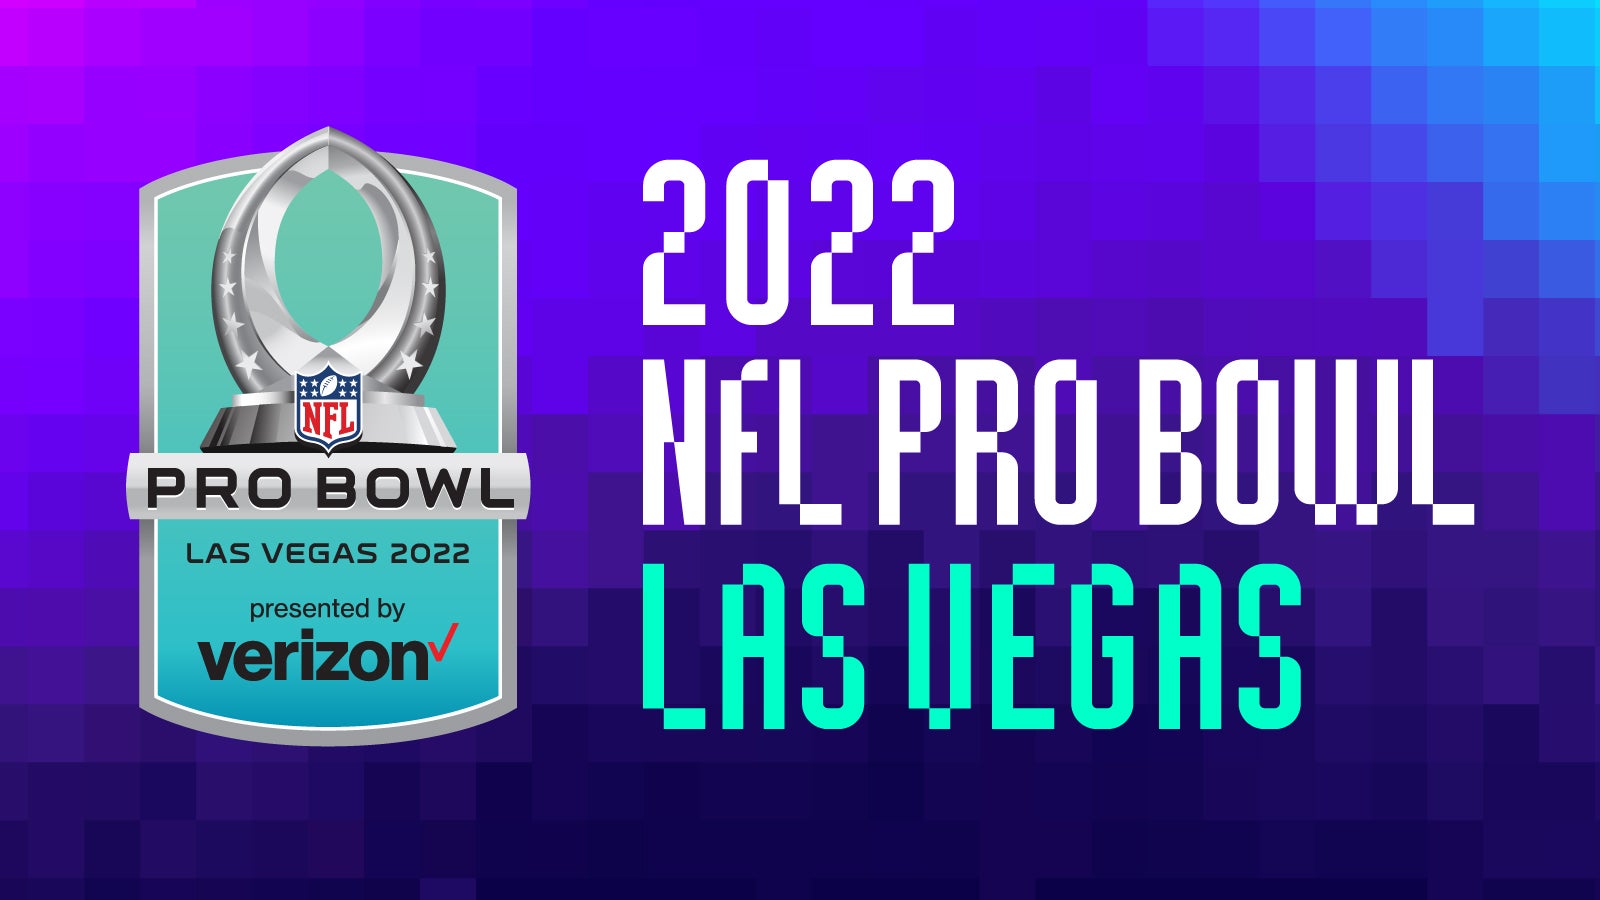 Tickets for NFL Pro Bowl in Las Vegas go on sale to public next